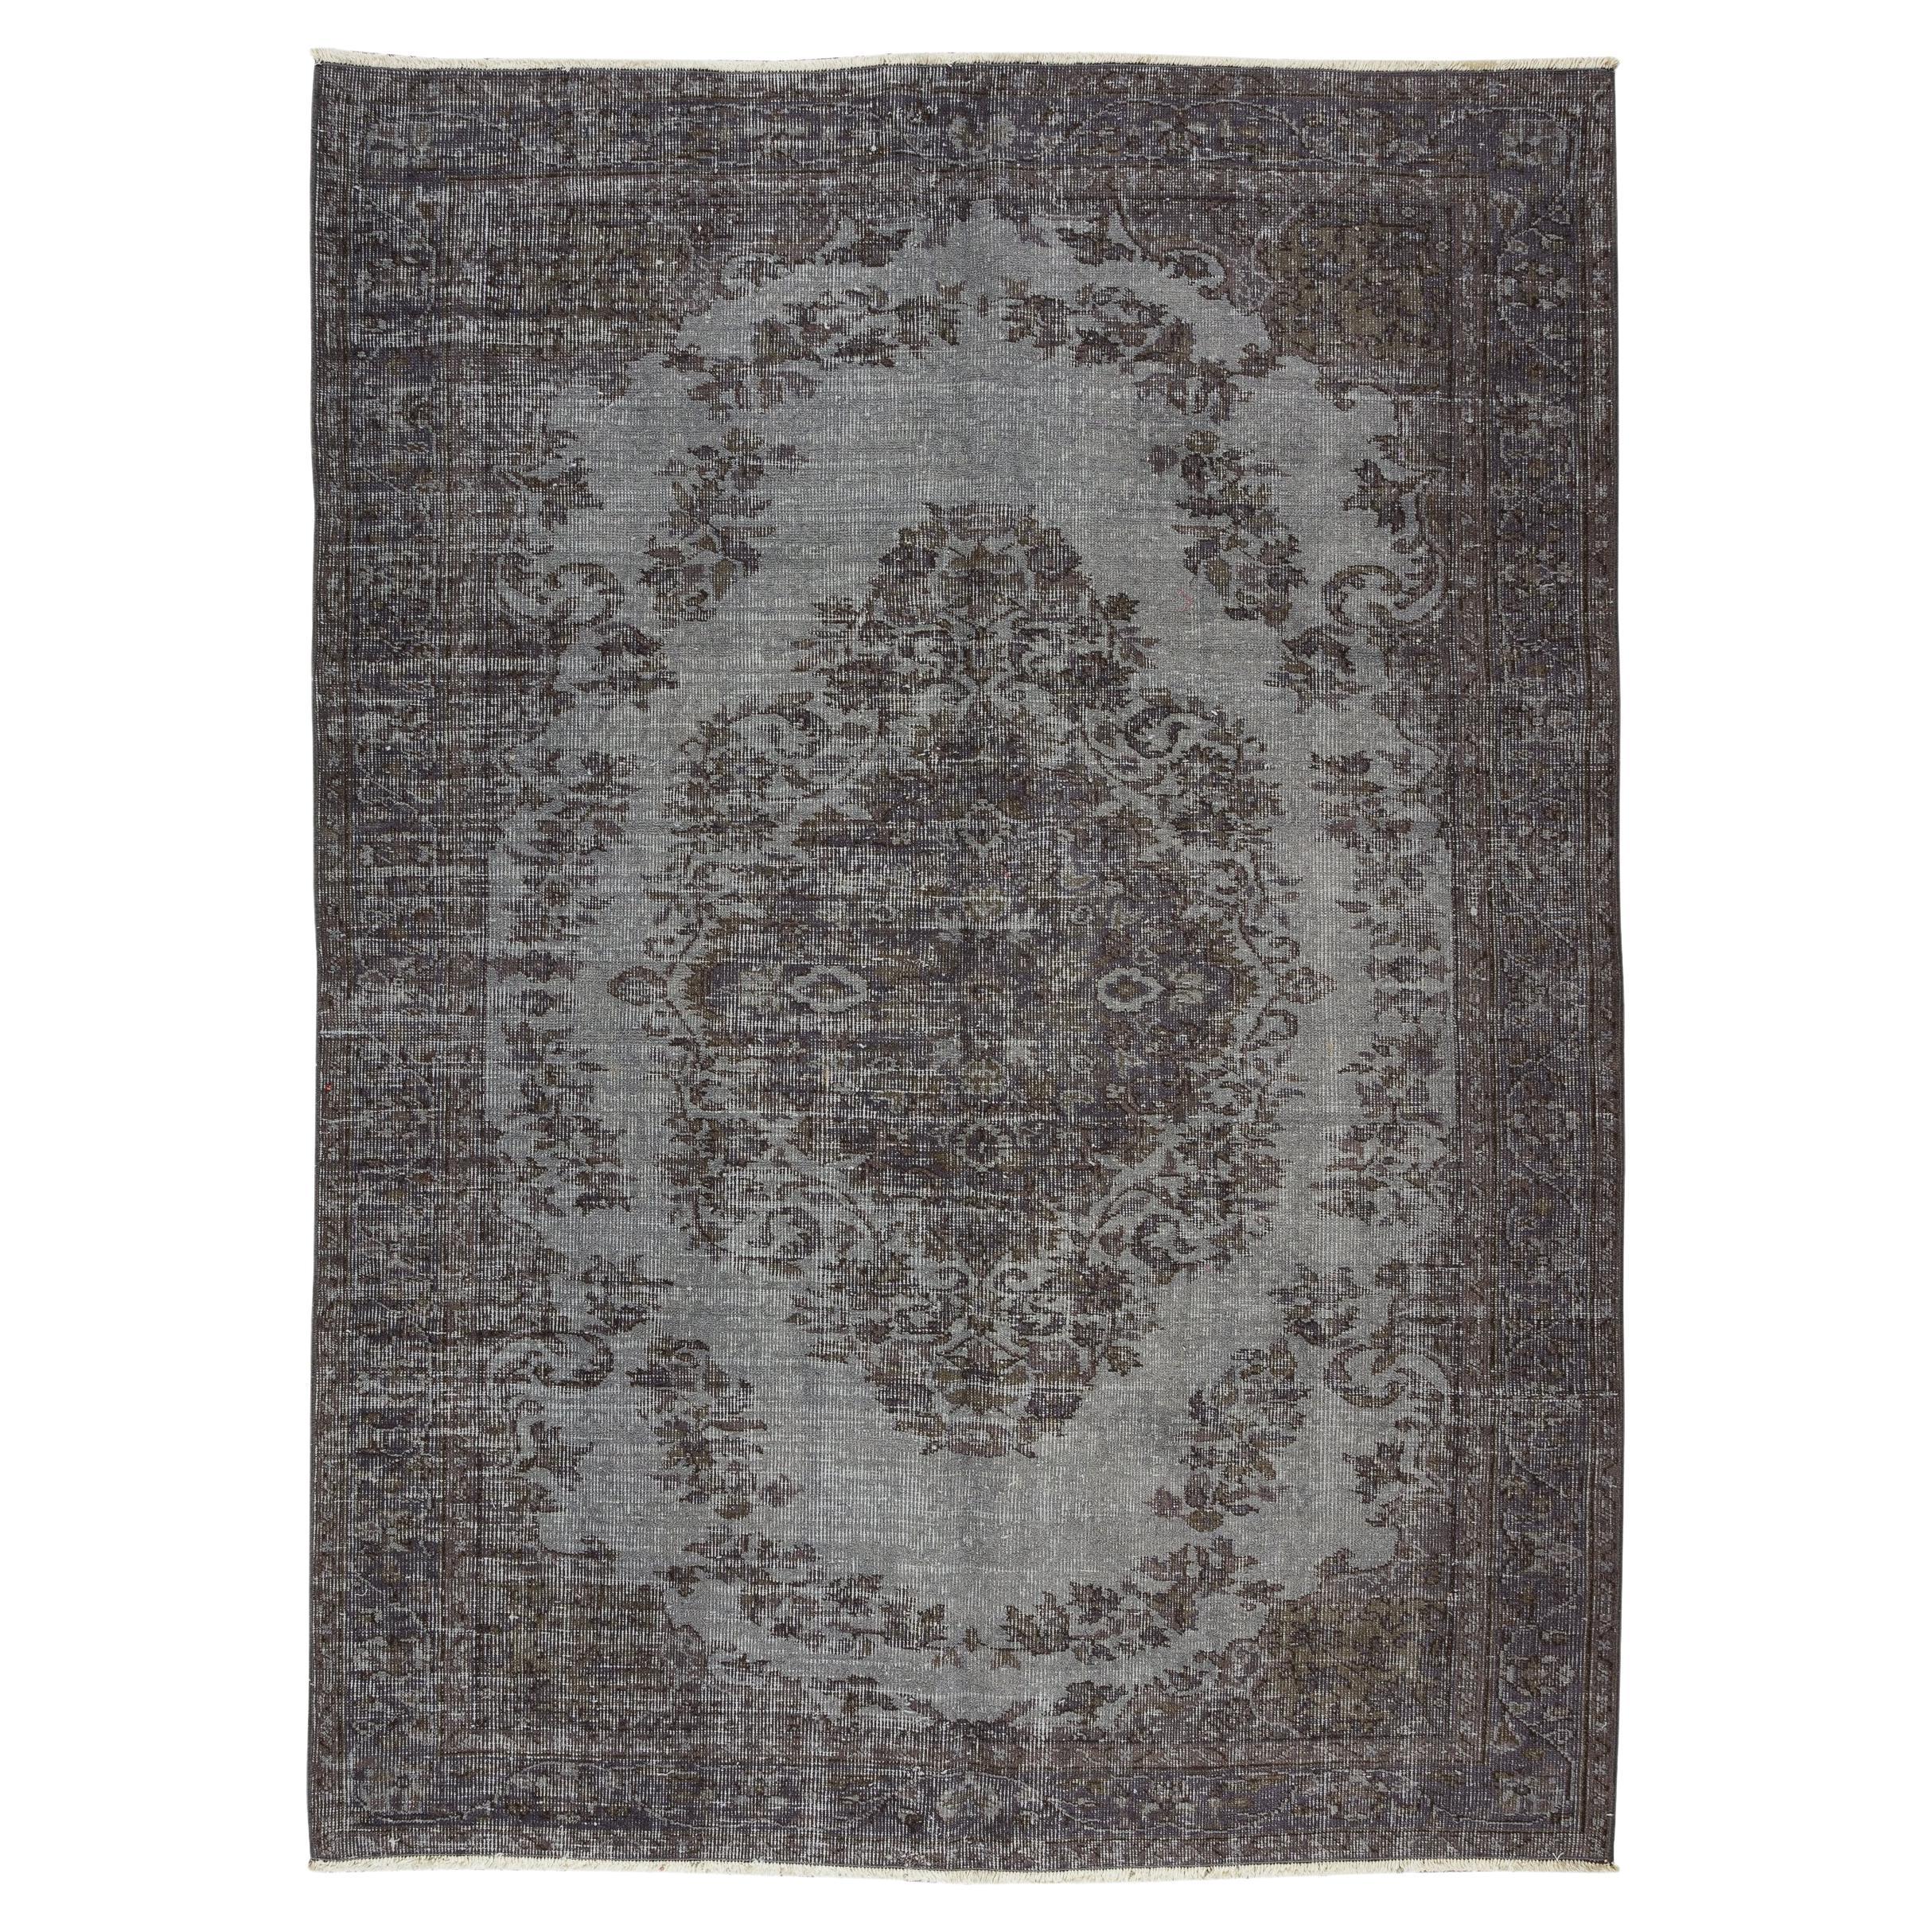 5.5x7.6 Ft Vintage Medallion Design Area Rug in Gray, Hand-Knotted in Turkey